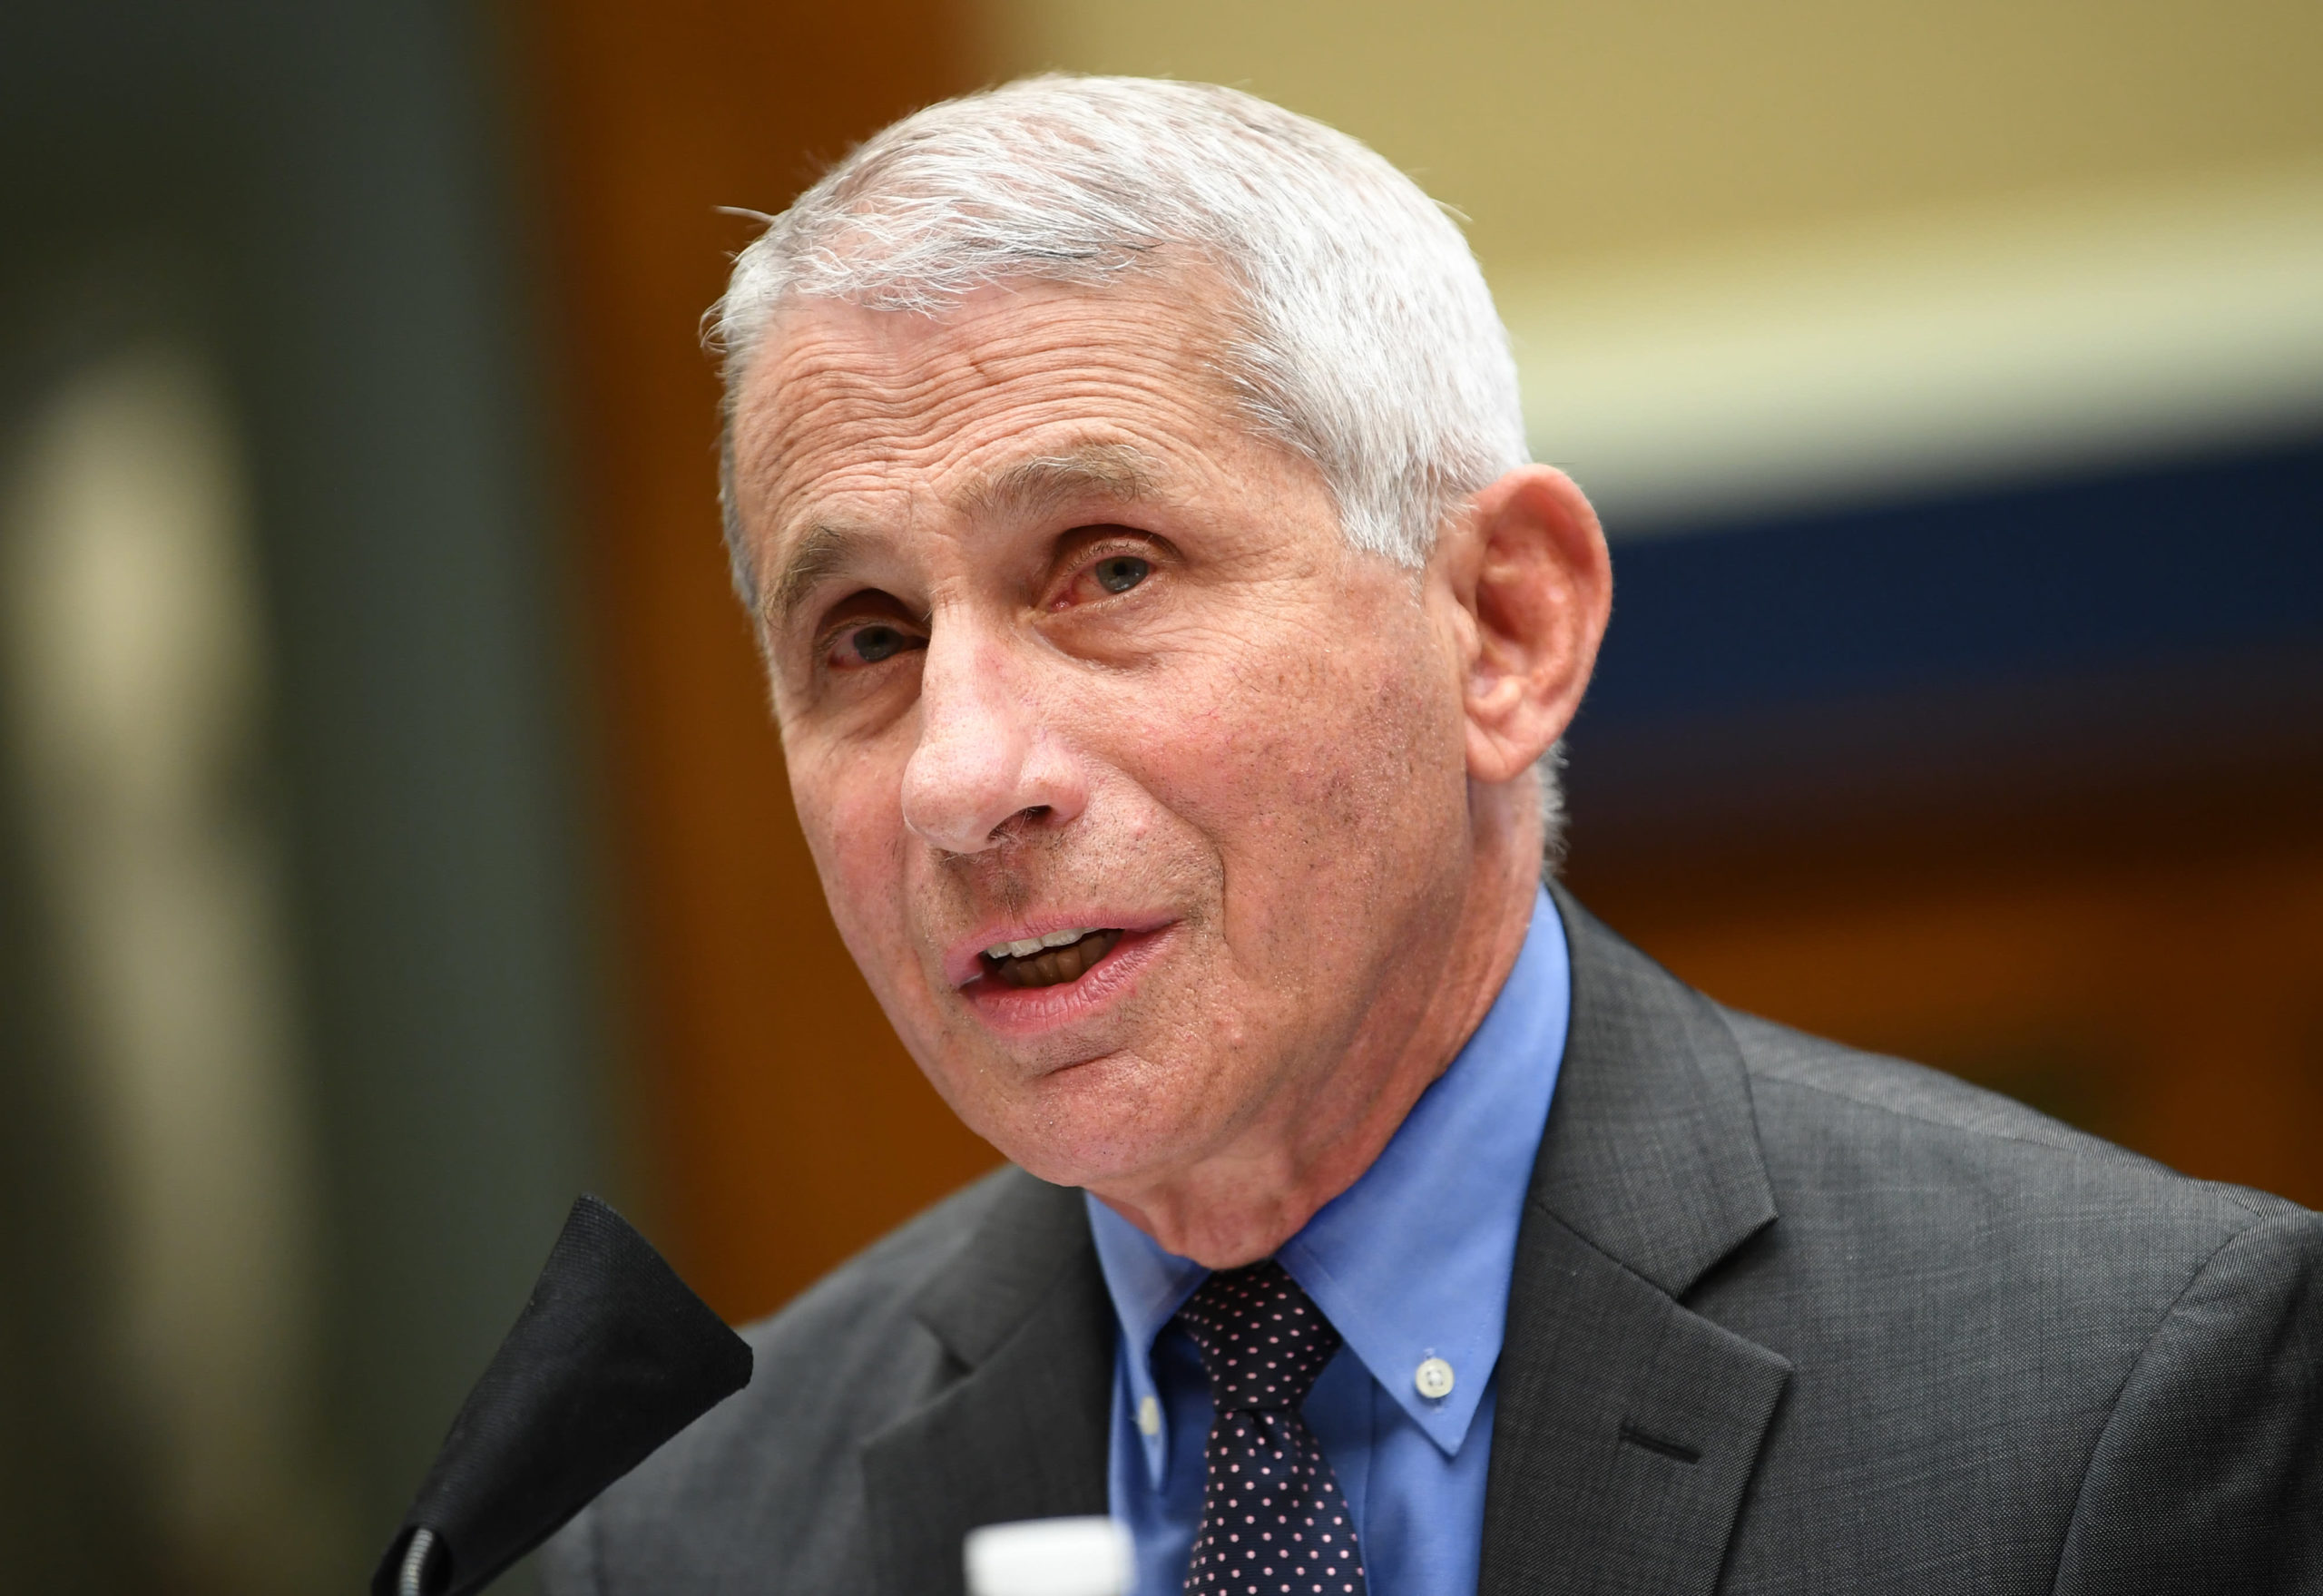 Fauci says he has confidence approval will not be political